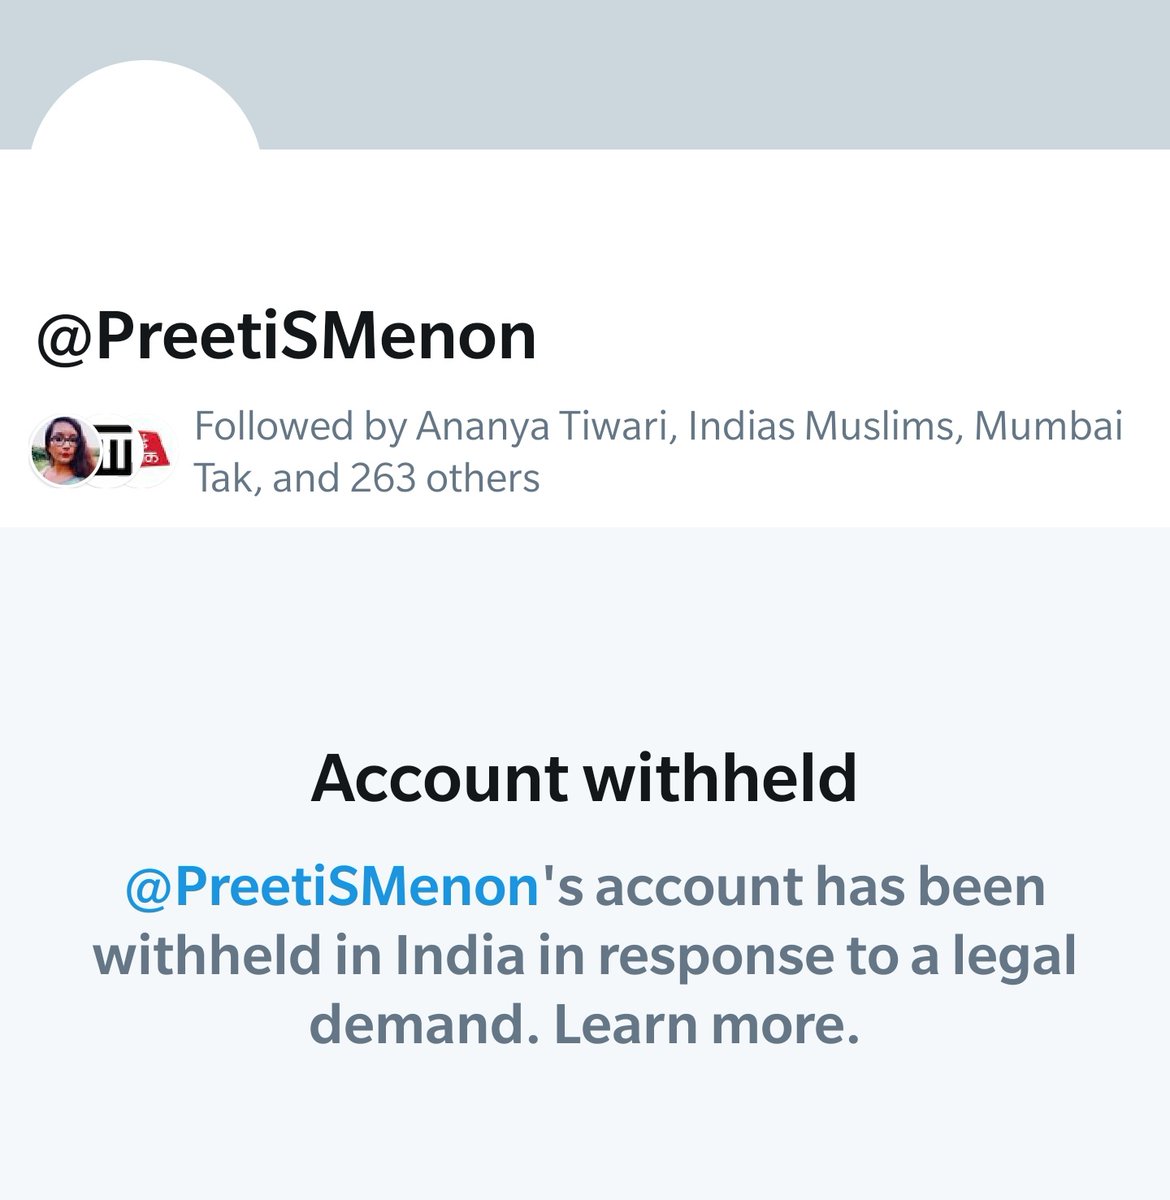 Also,  @PreetiSMenon's account is withheld in India.